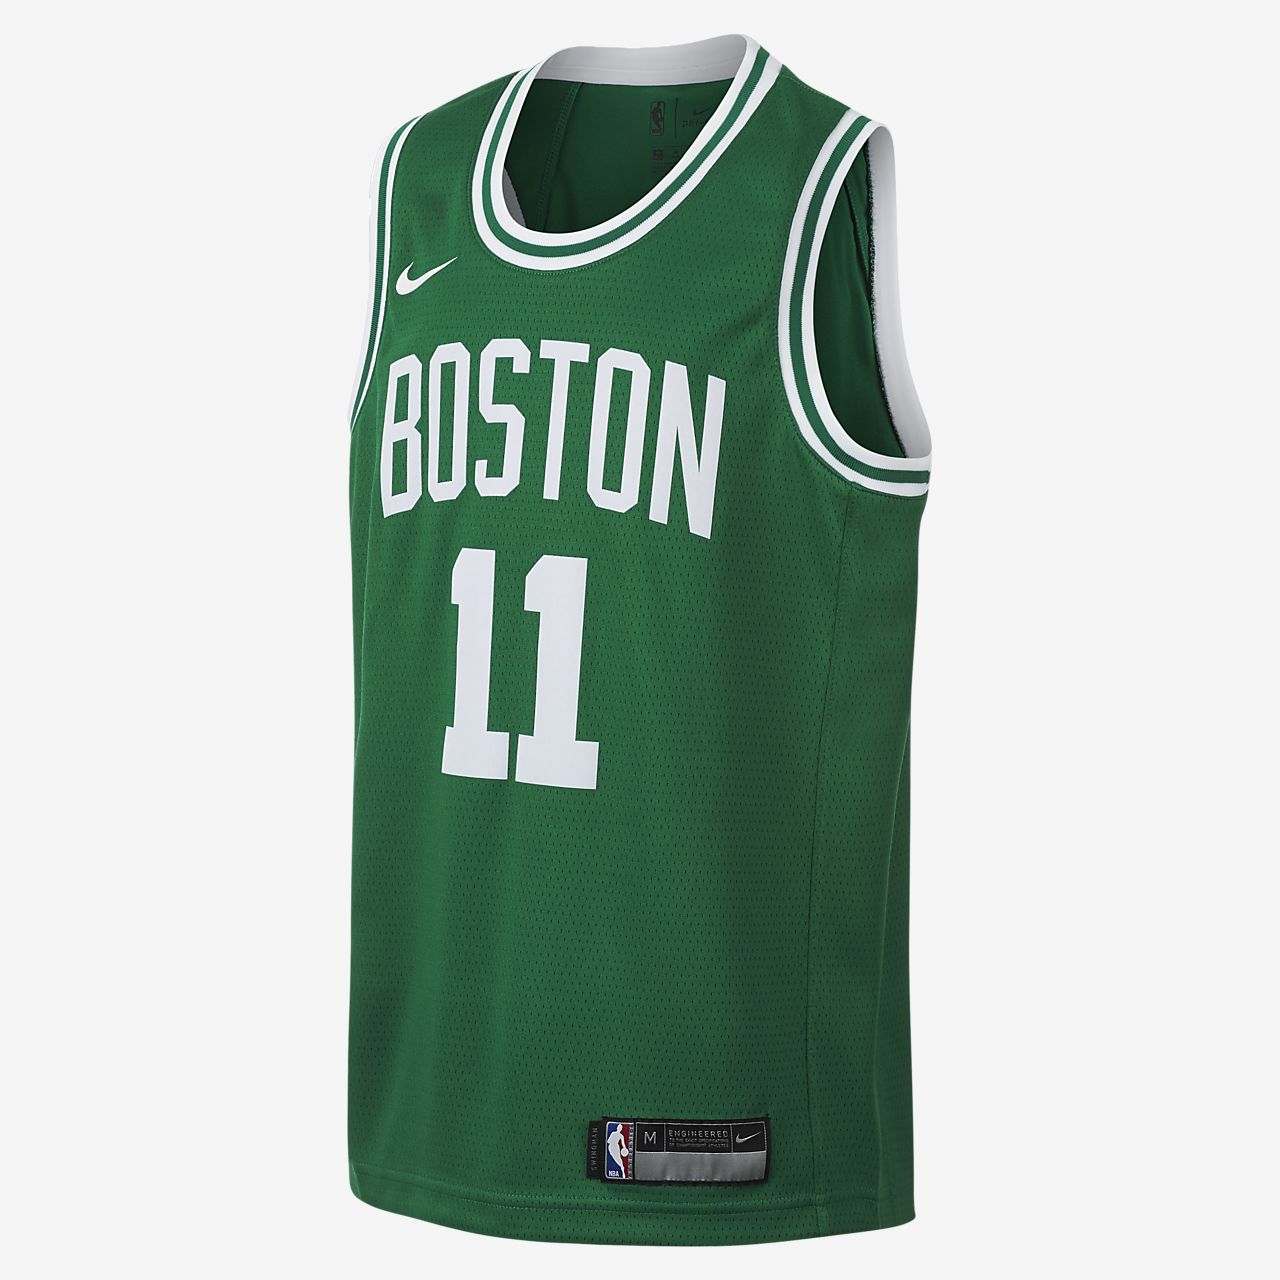 kyrie irving black jersey youth